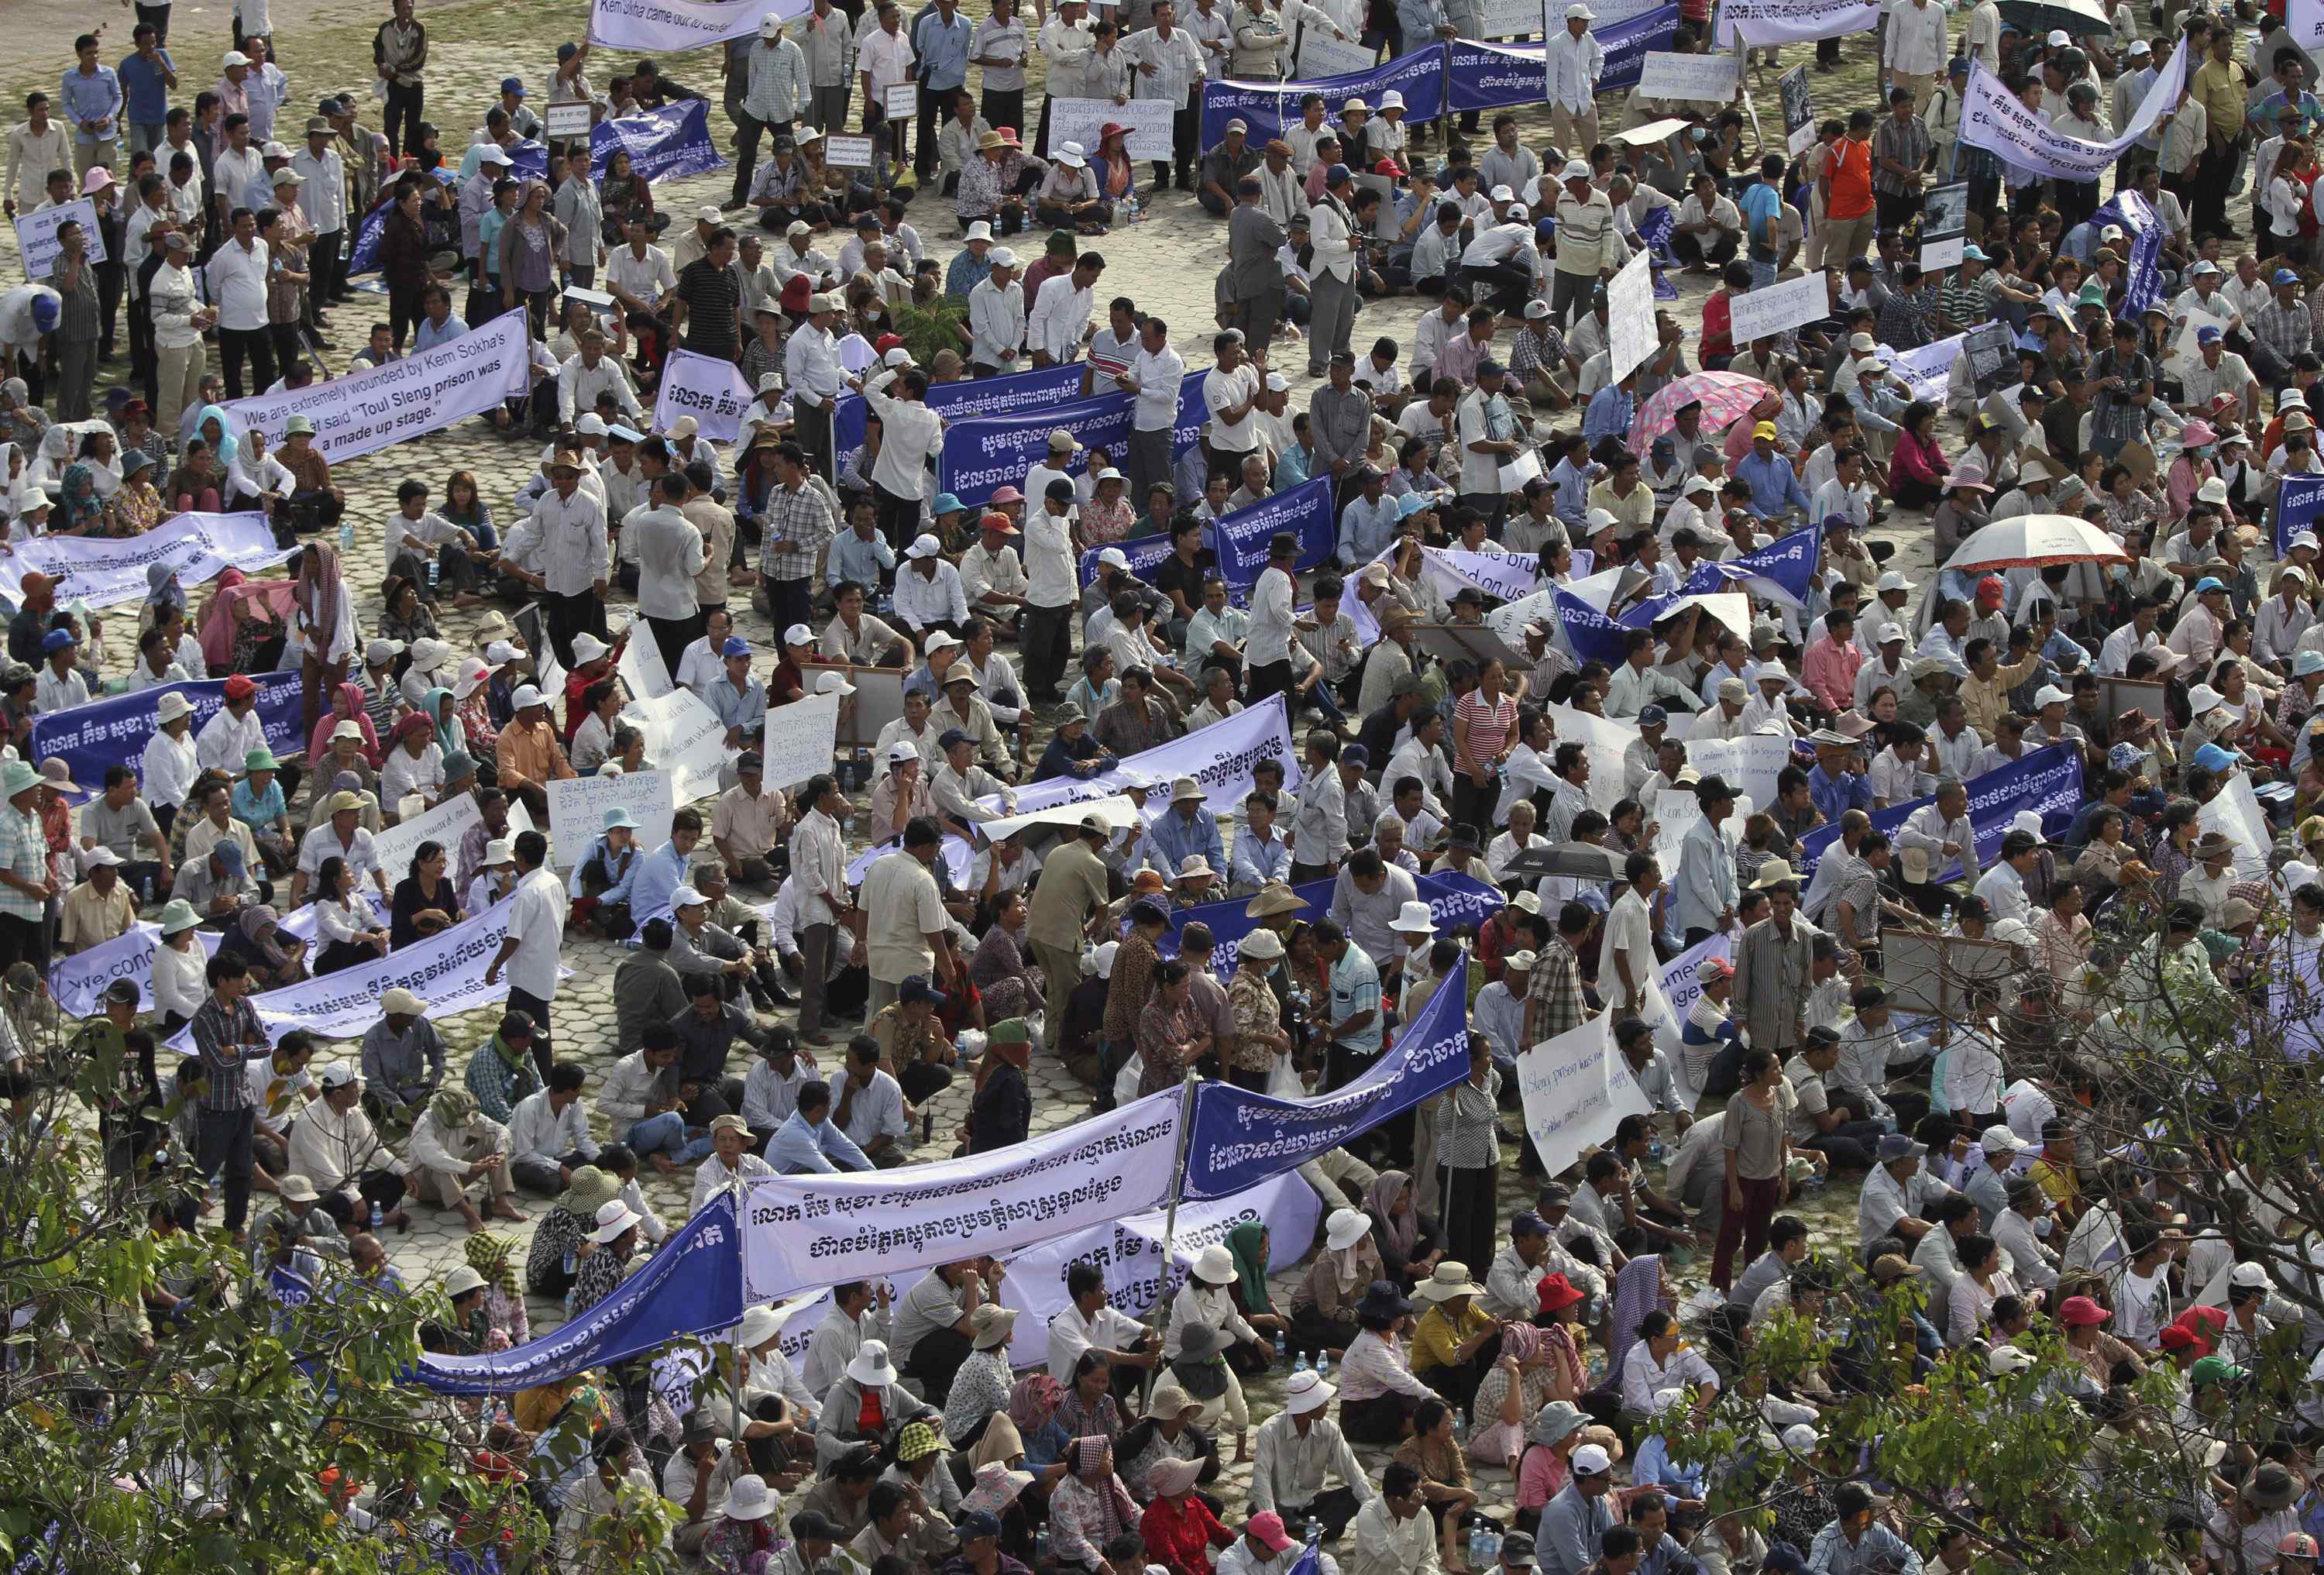 Protestors gather to rally against acting CNRP chief Kem Sokha at Freedom Park in Phnom Penh. Photo: Reuters